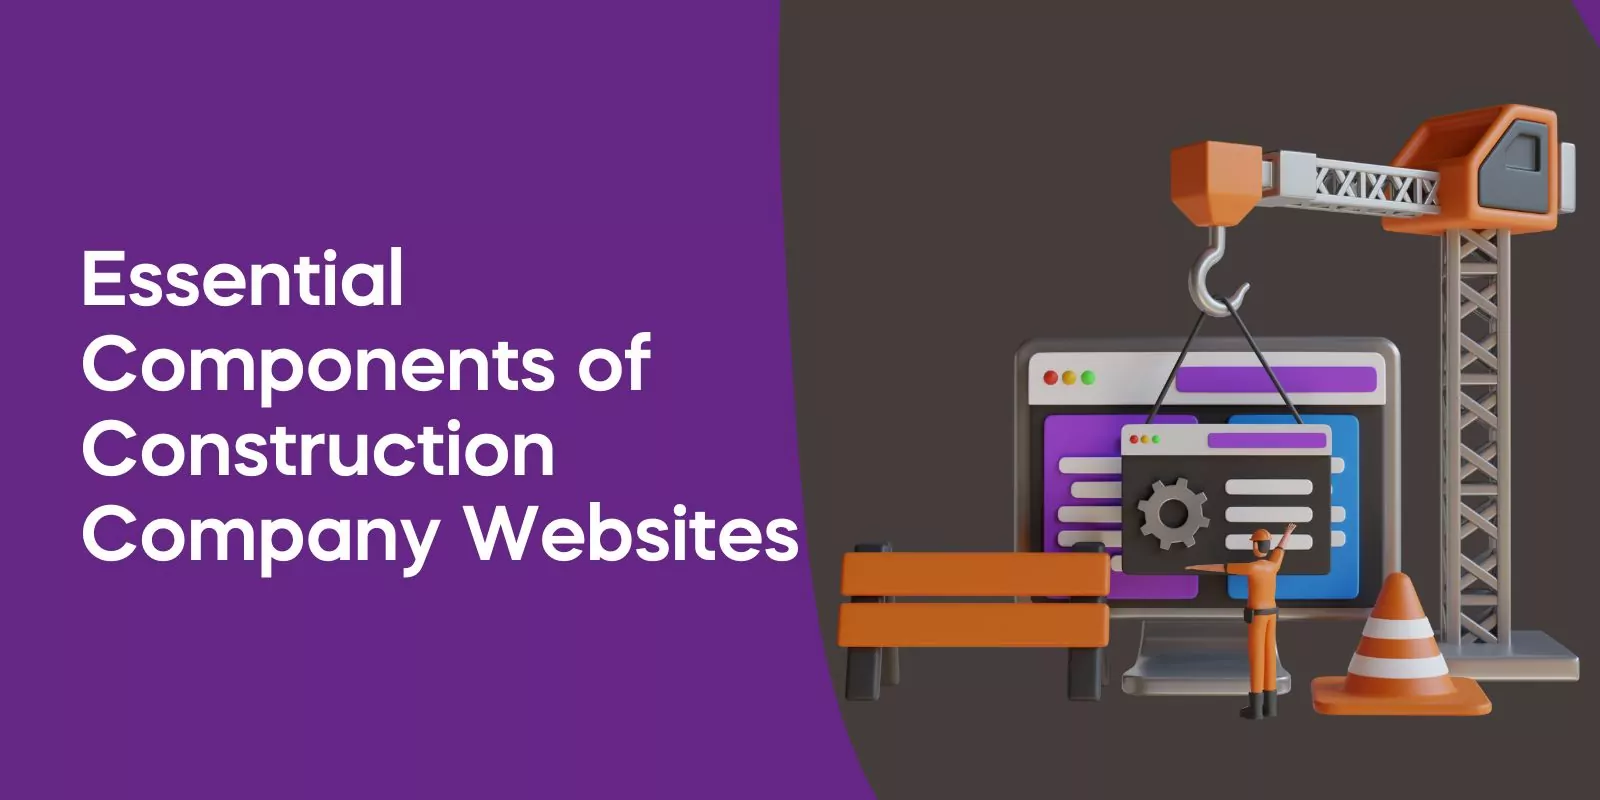 Essential Components of Construction Company Websites